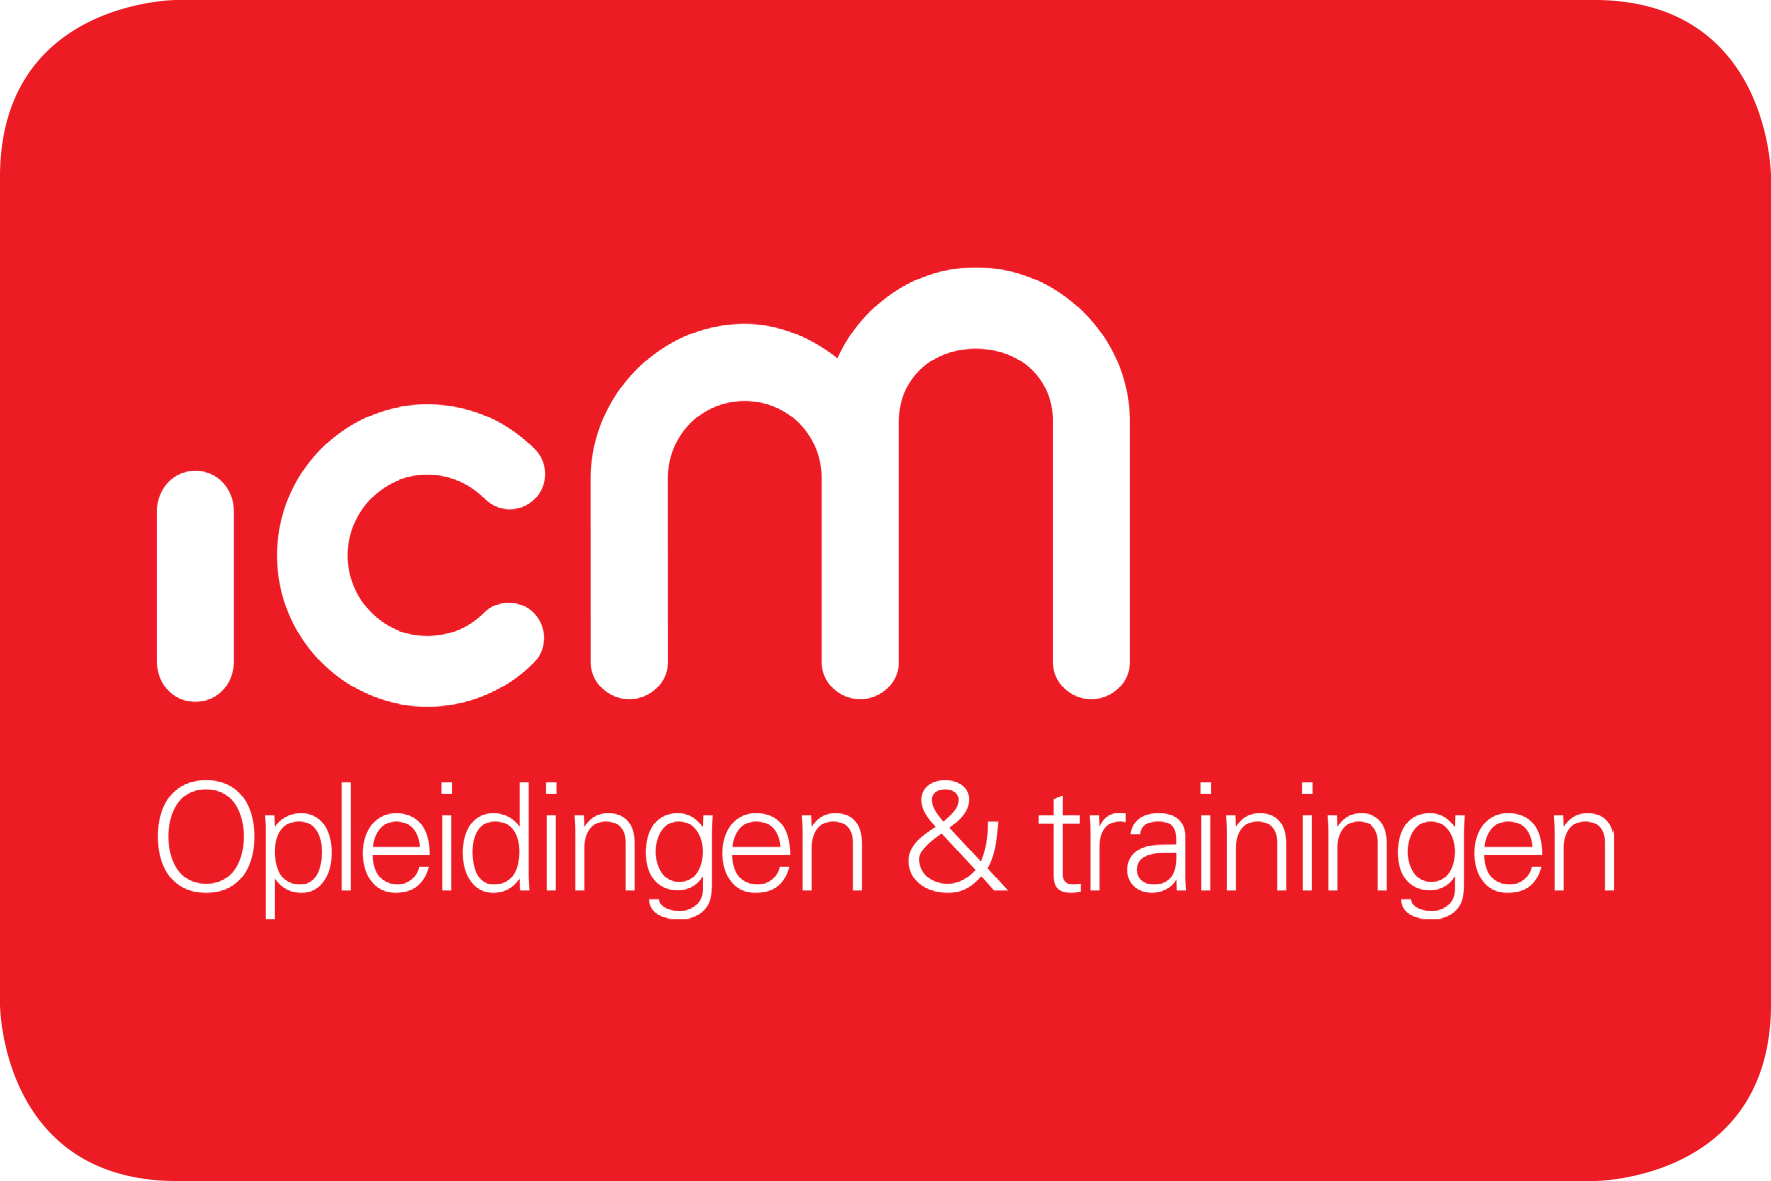 ICM logo wit op rood NW